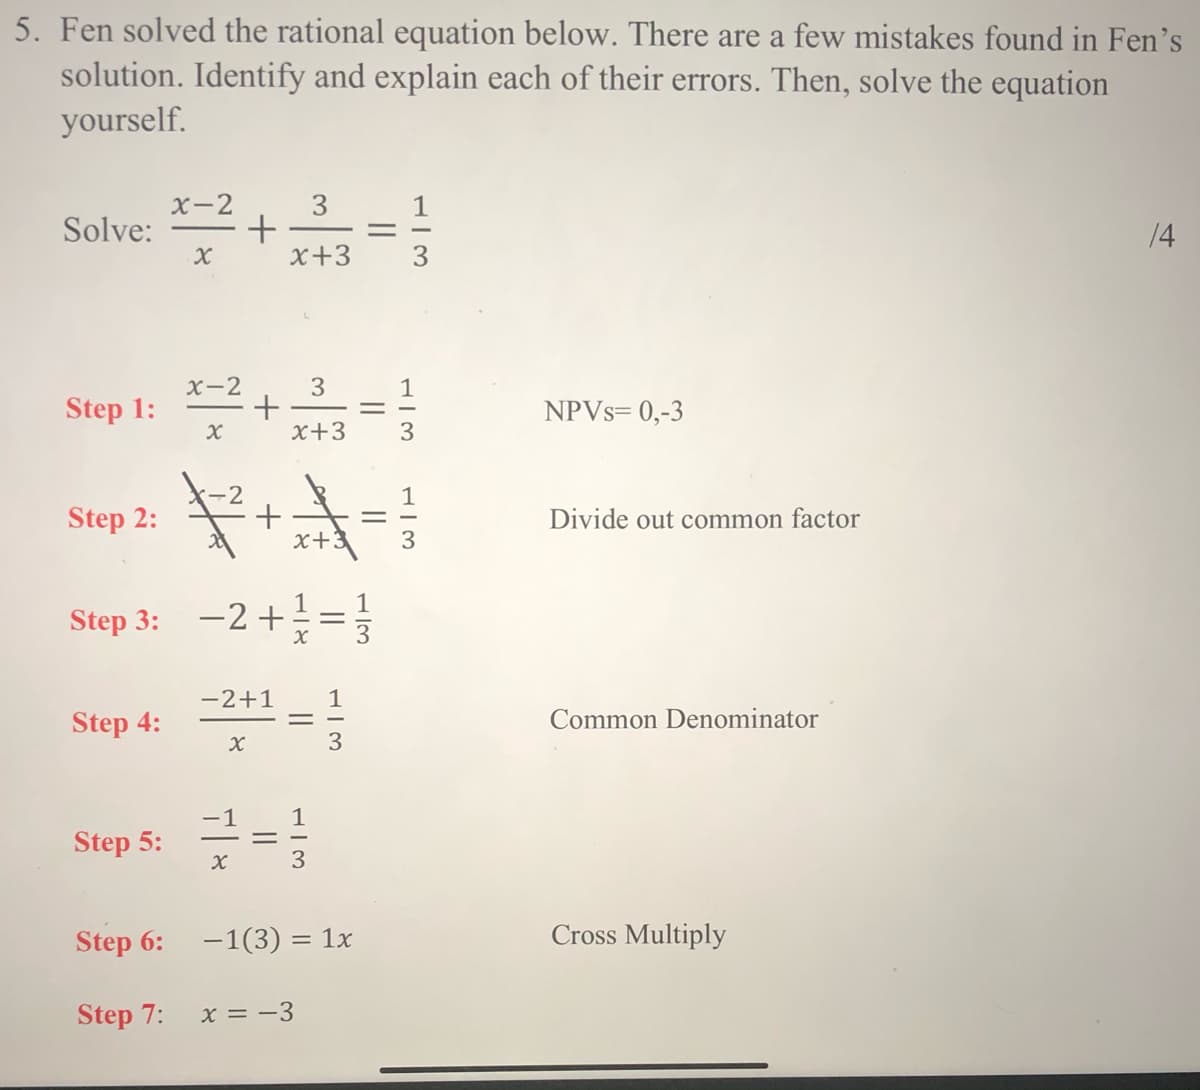 5. Fen solved the rational equation below. There are a few mistakes found in Fen's
solution. Identify and explain each of their errors. Then, solve the equation
yourself.
3
+
x+3
X-2
Solve:
14
X-2
3
1
Step 1:
NPVS= 0,-3
x+3
2
+
x+:
1
Step 2:
Divide out common factor
3
1
Step 3: =}
-2 +
-2+1
1
Step 4:
Common Denominator
1
-1
Step 5:
Step 6:
-1(3) = 1x
Cross Multiply
Step 7:
x = -3
||
||
||
